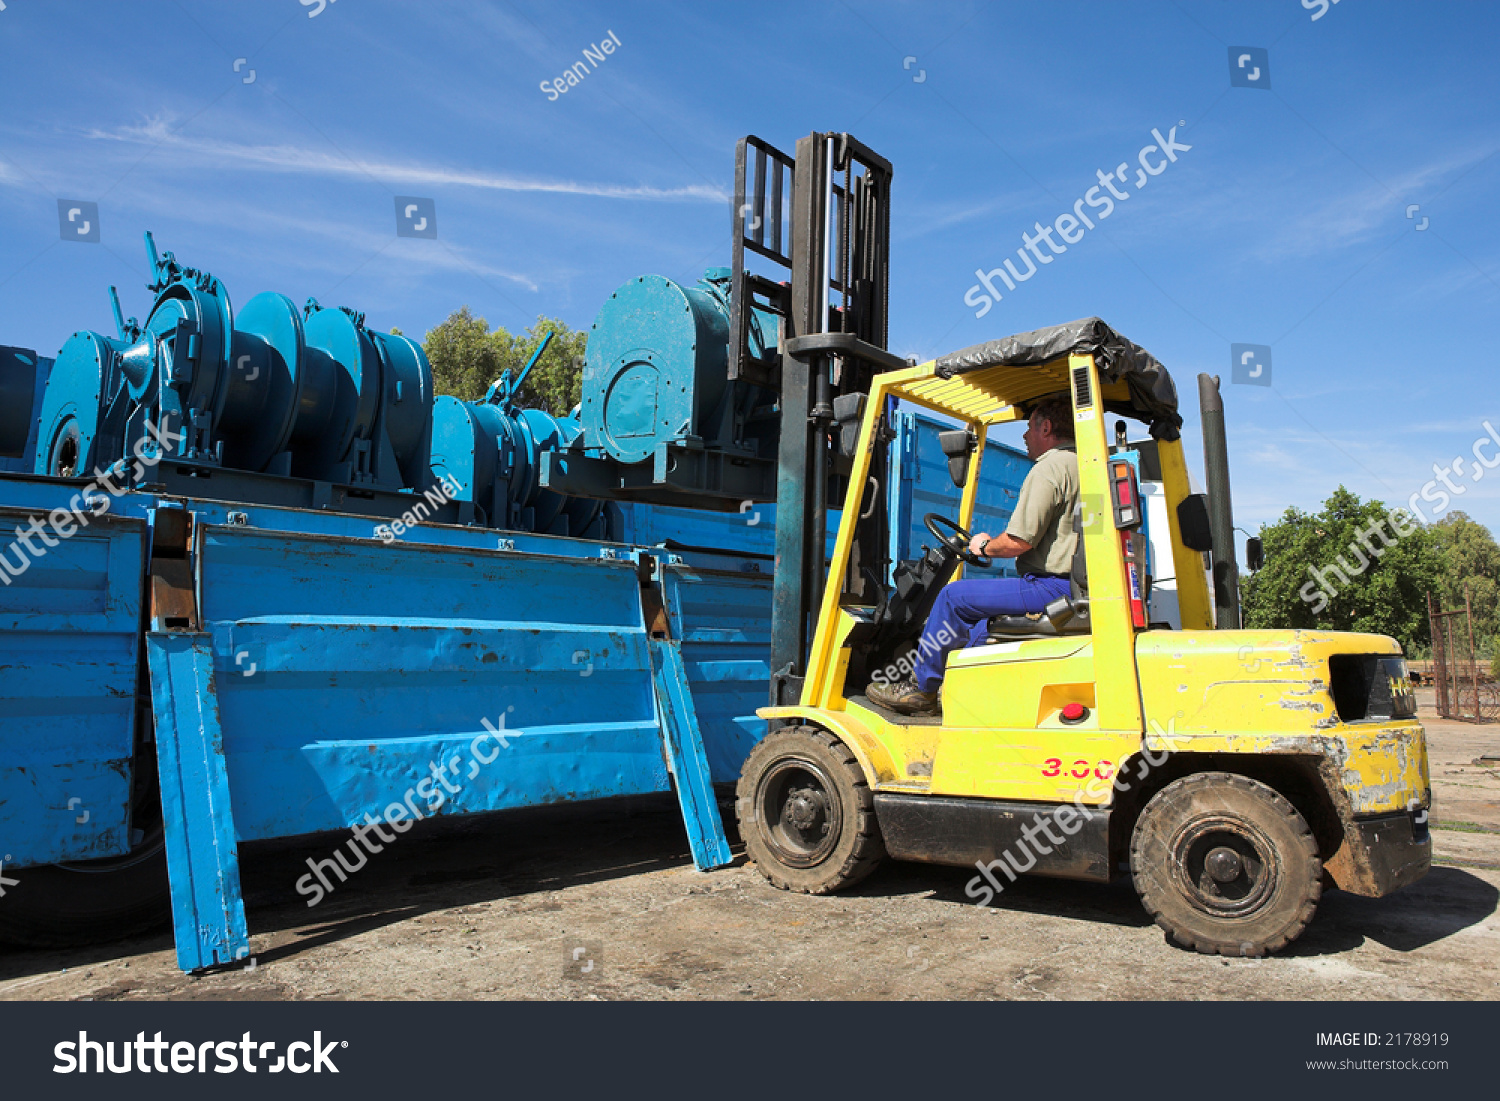 Yellow Forklift Placing Cargo On Flatbed Industrial Stock Image 2178919